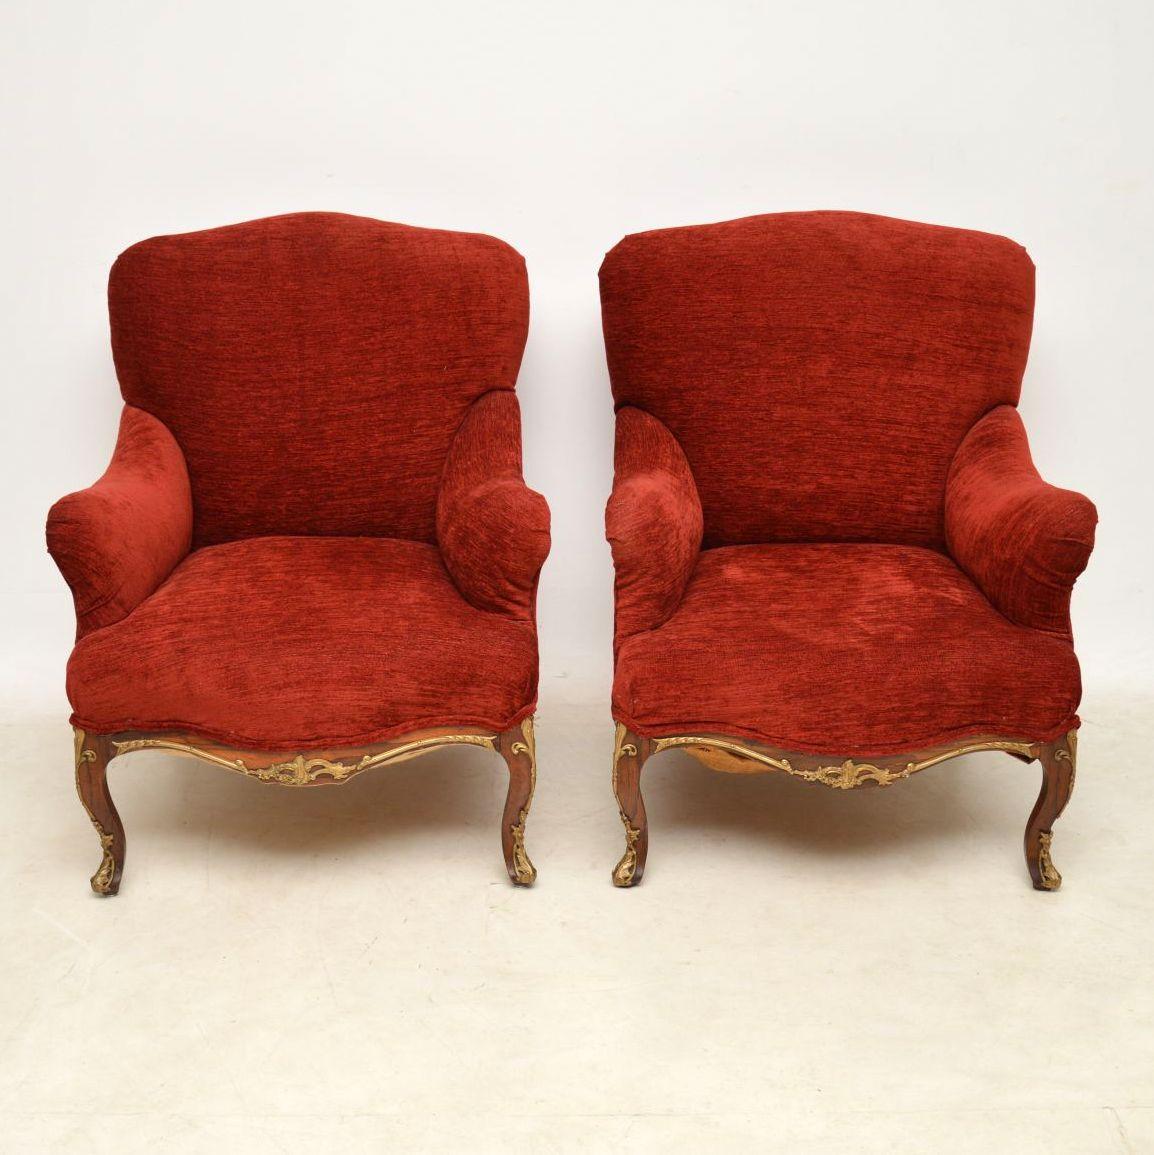 George IV Pair of Antique Rosewood Upholstered Armchairs